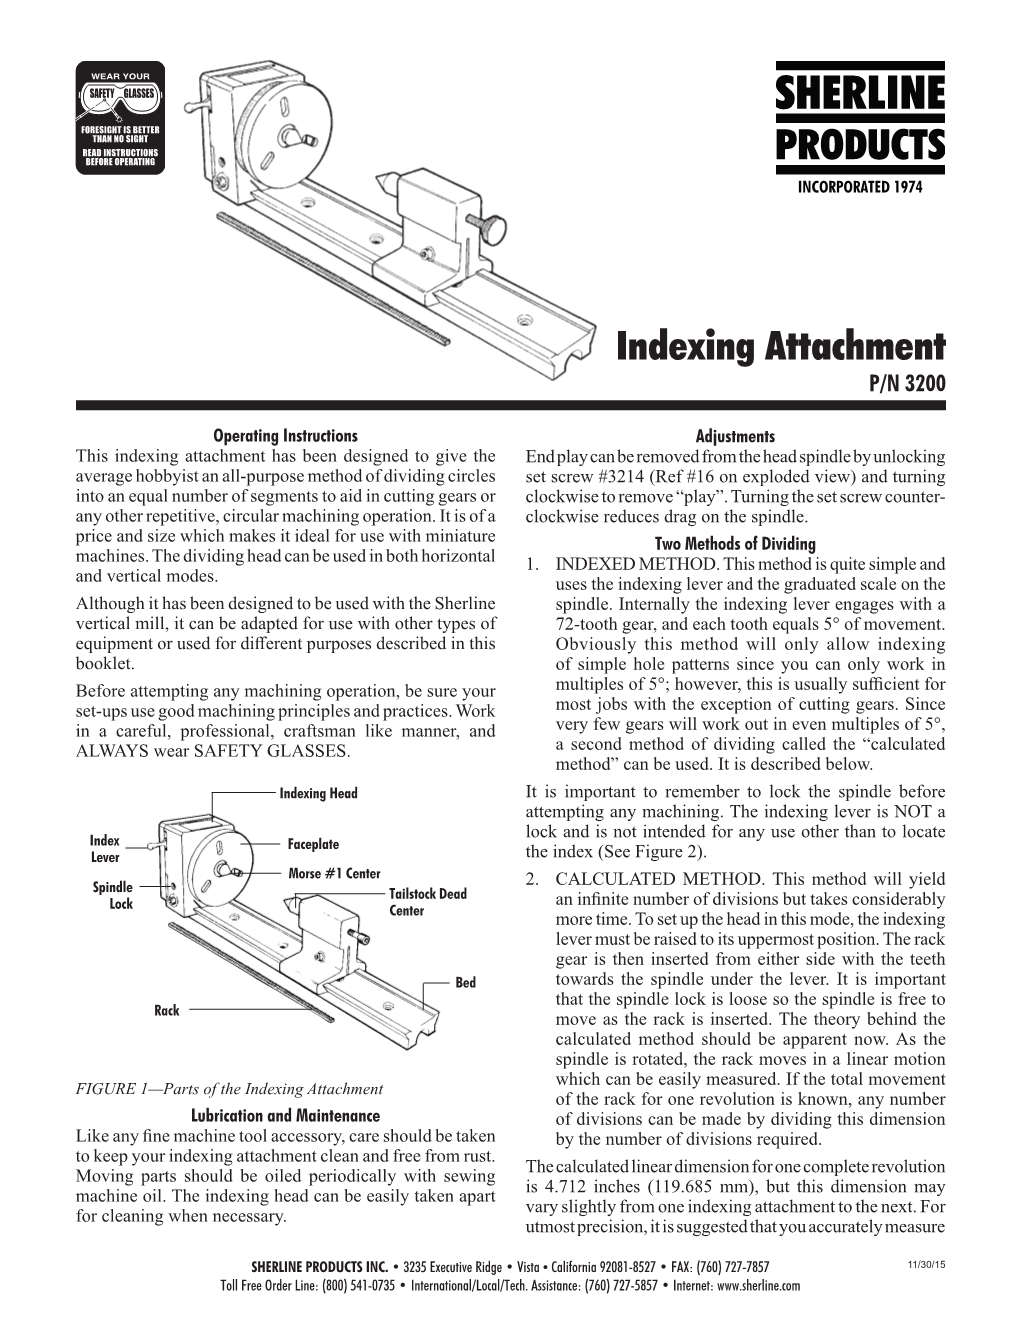 Indexing Attachment P/N 3200